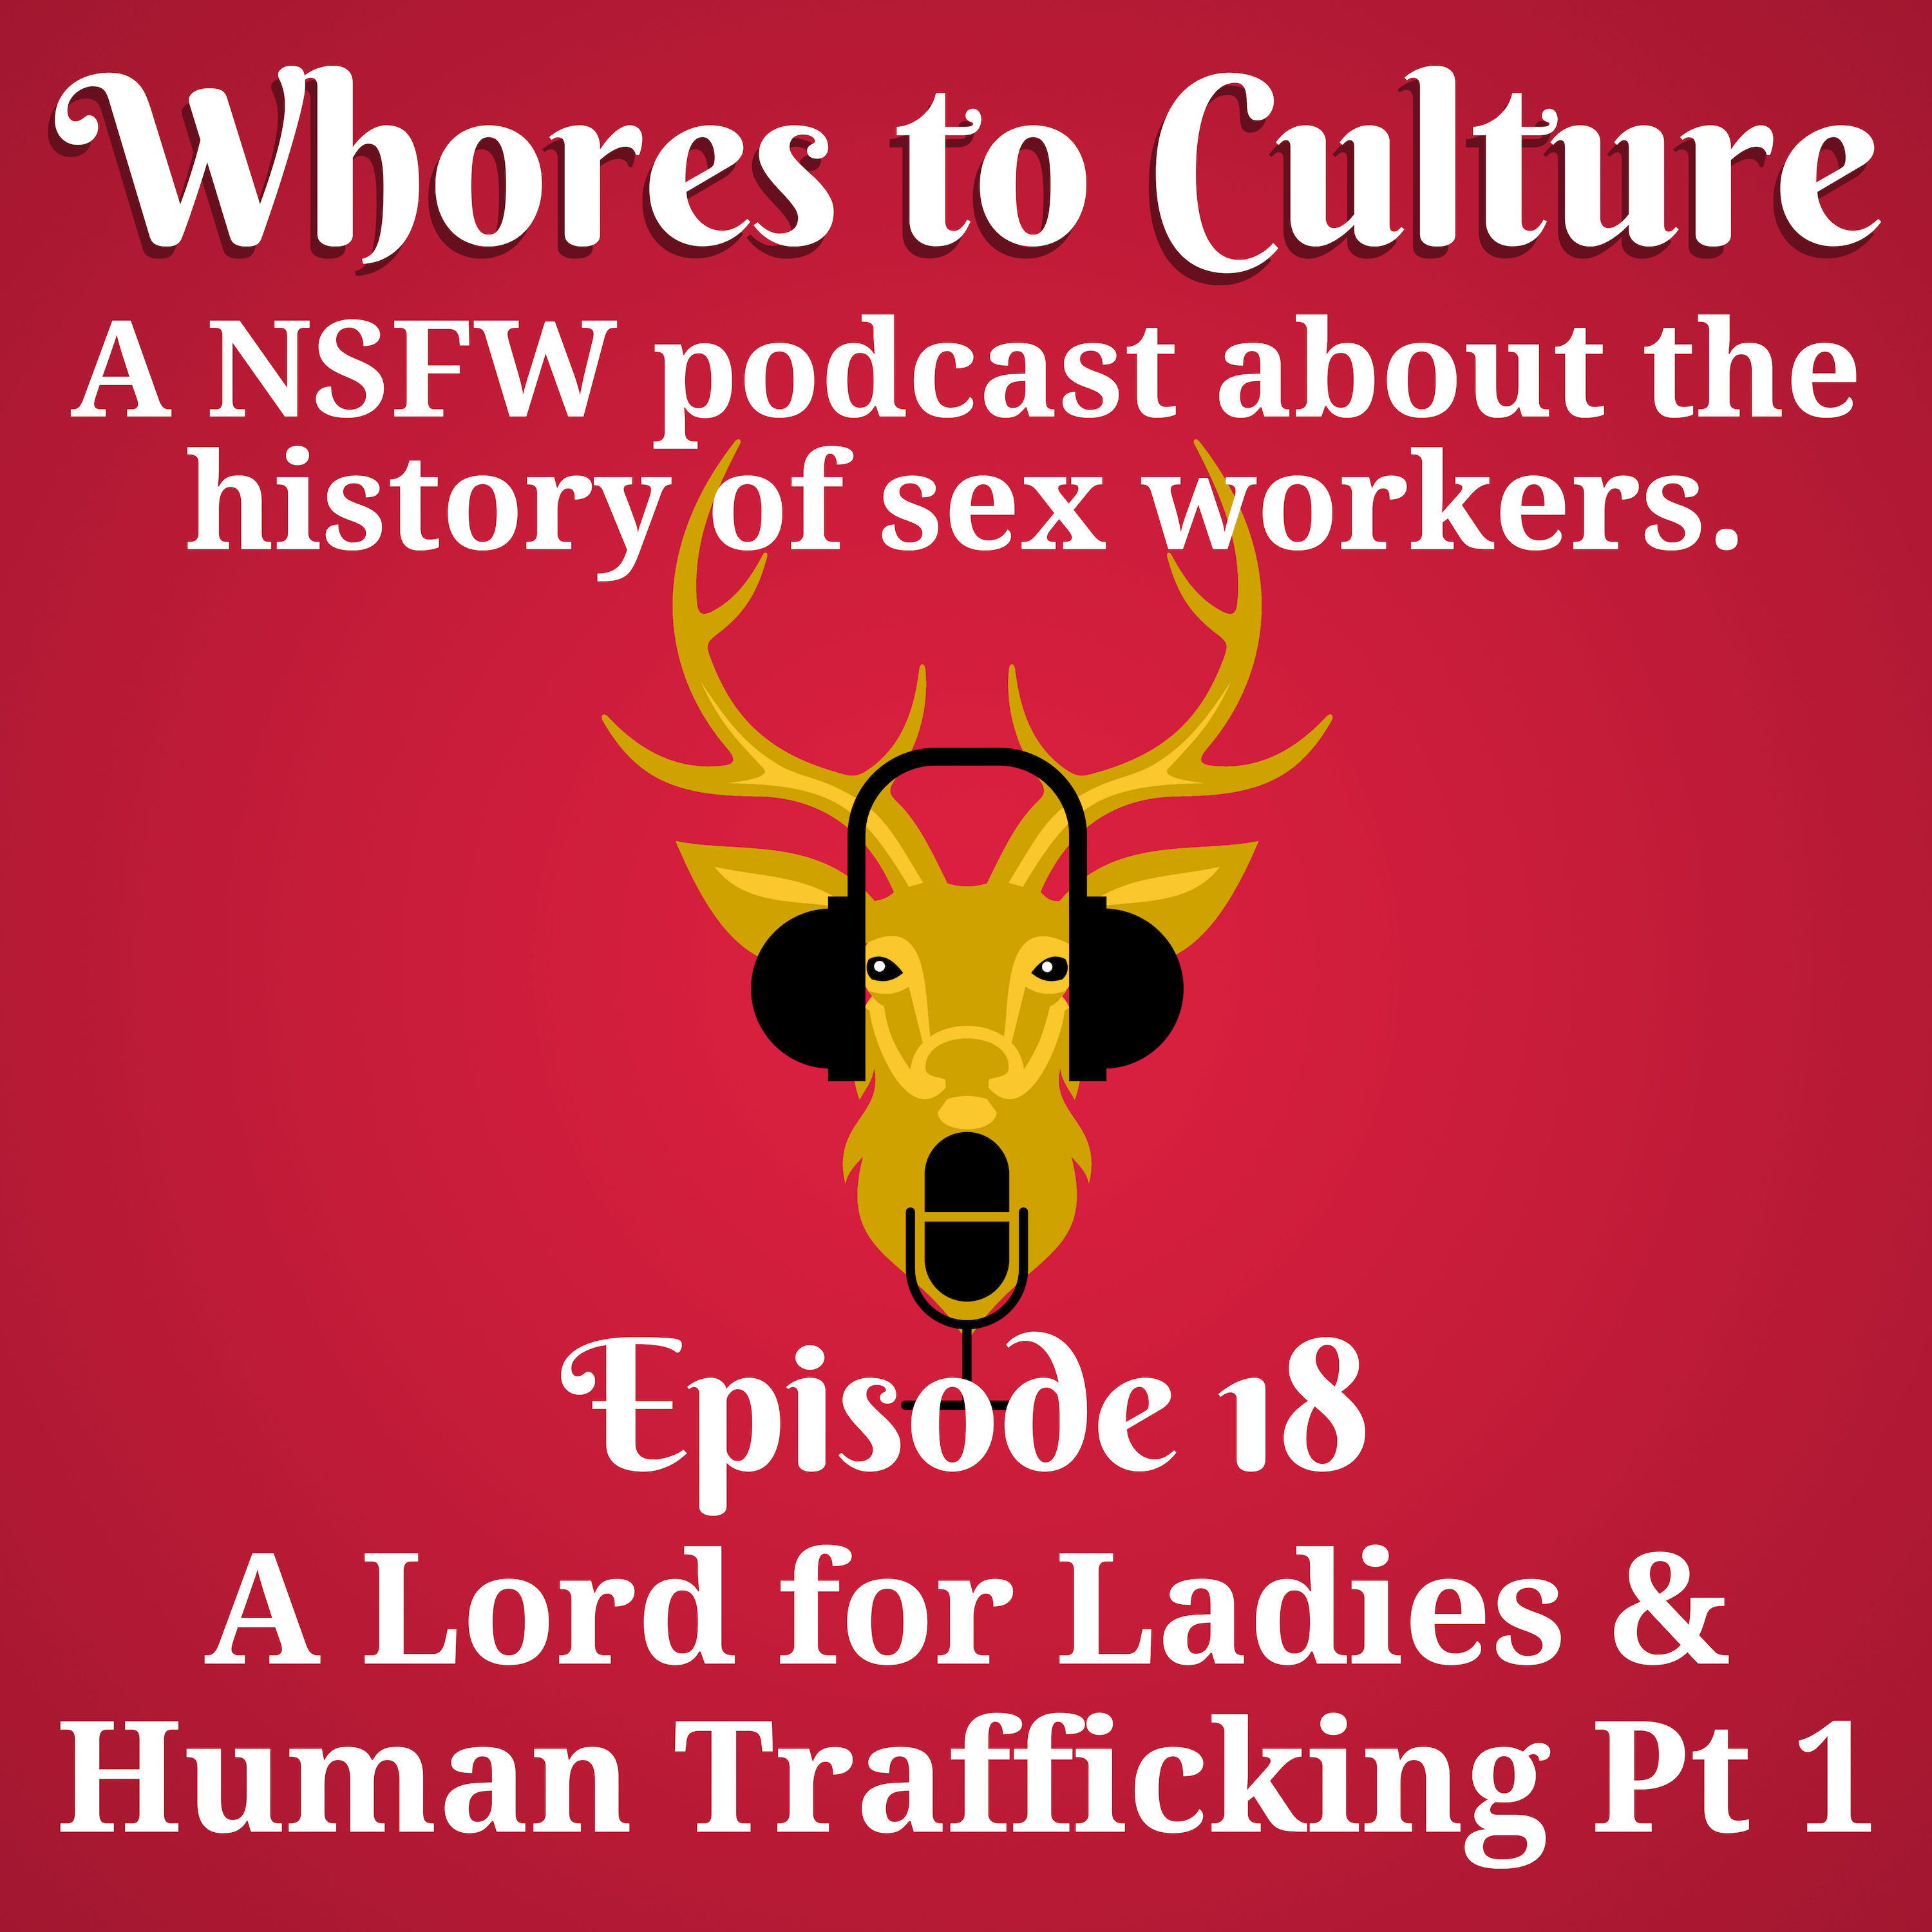 A Lord for Ladies & Human Trafficking Pt 1/2 – CONTENT WARNING